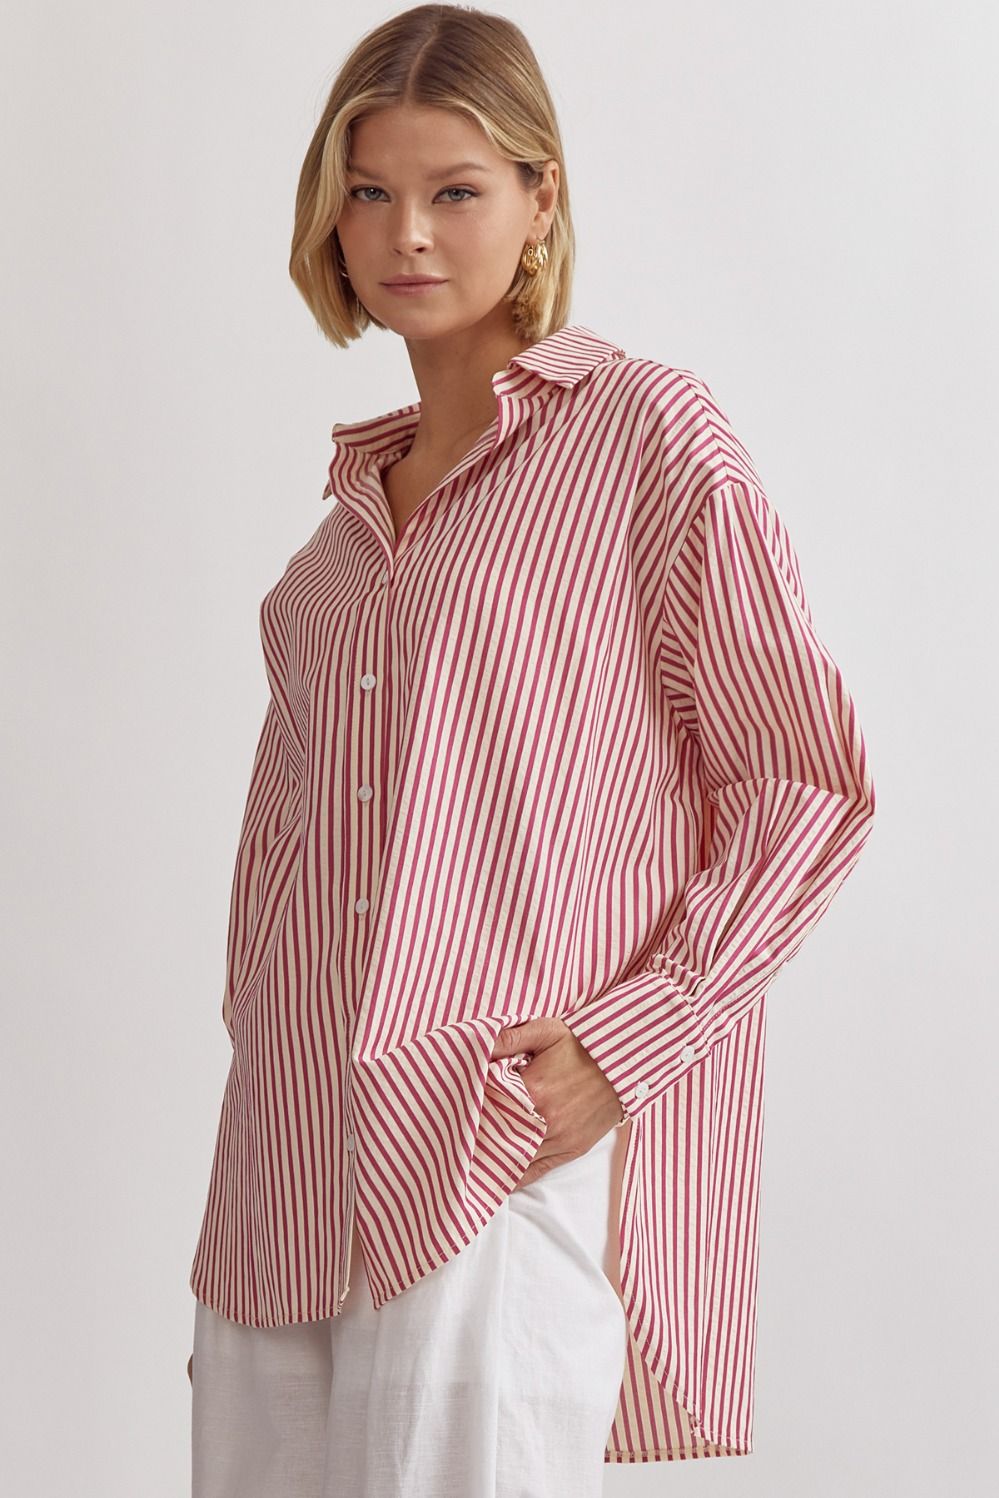 Dianna Classic Stripe Long Sleeve Collared Button Up Blouse - Pink